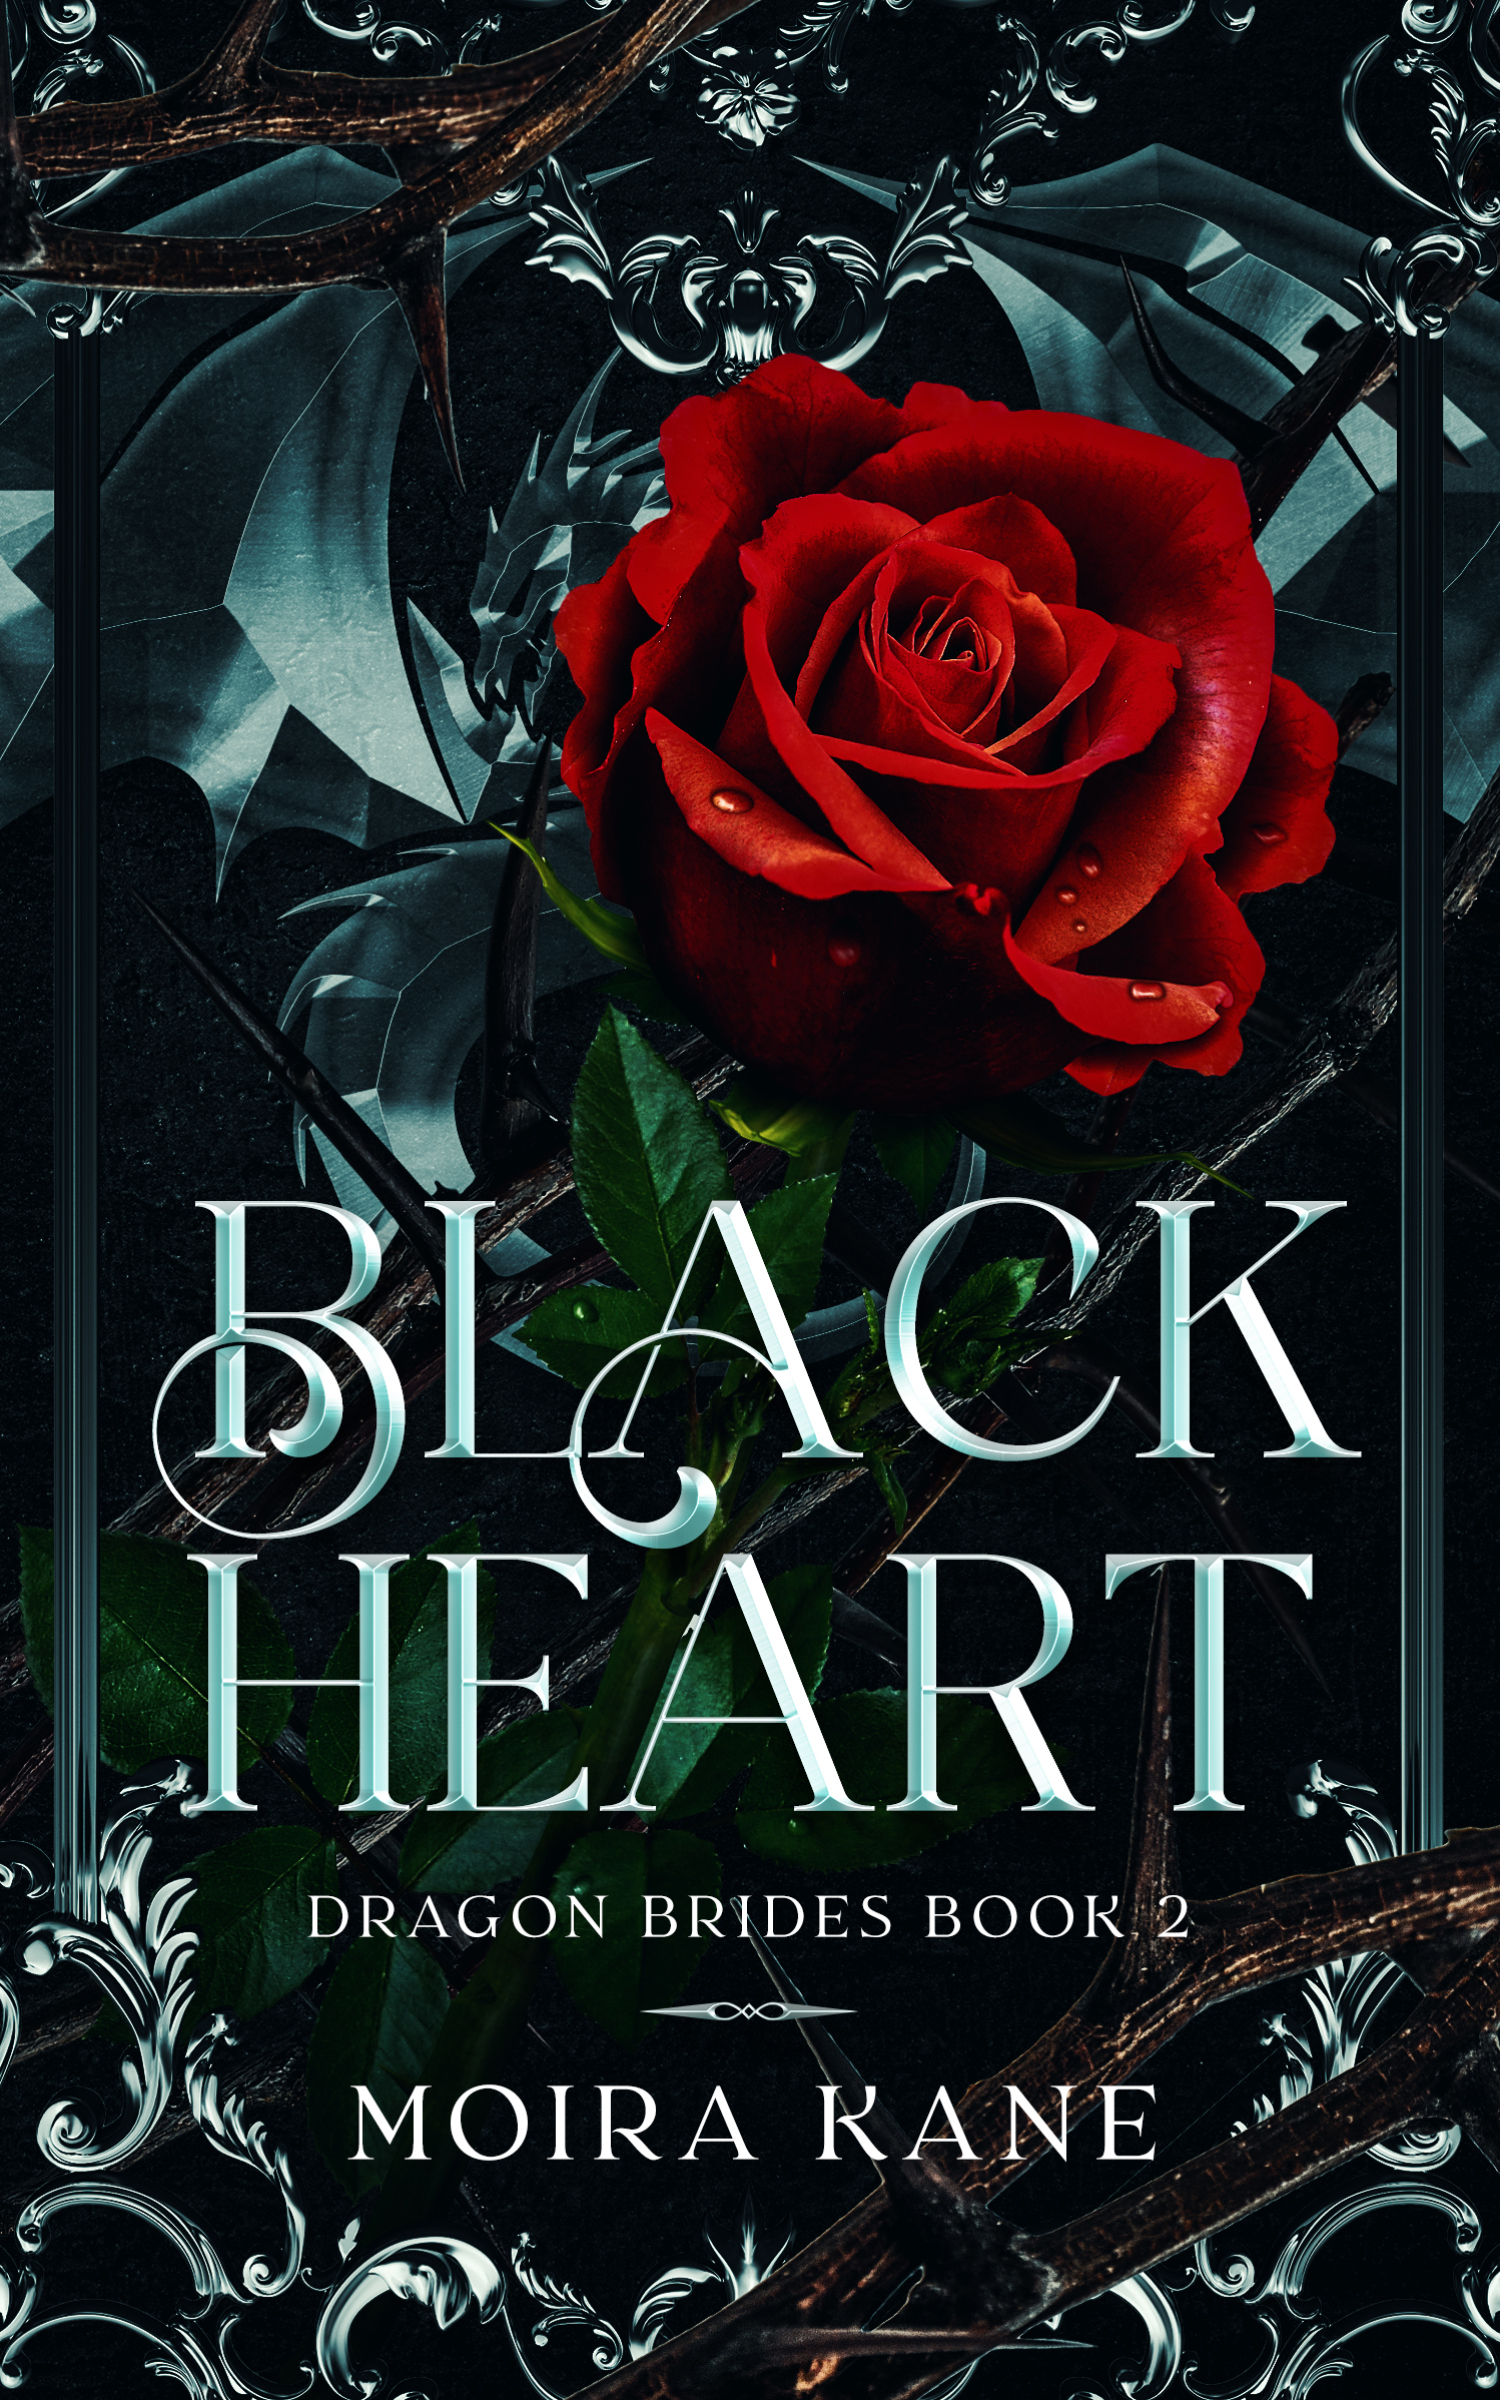 Red rose with sparkling crystal in the background. Image text reads Black Heart by Moira Kane